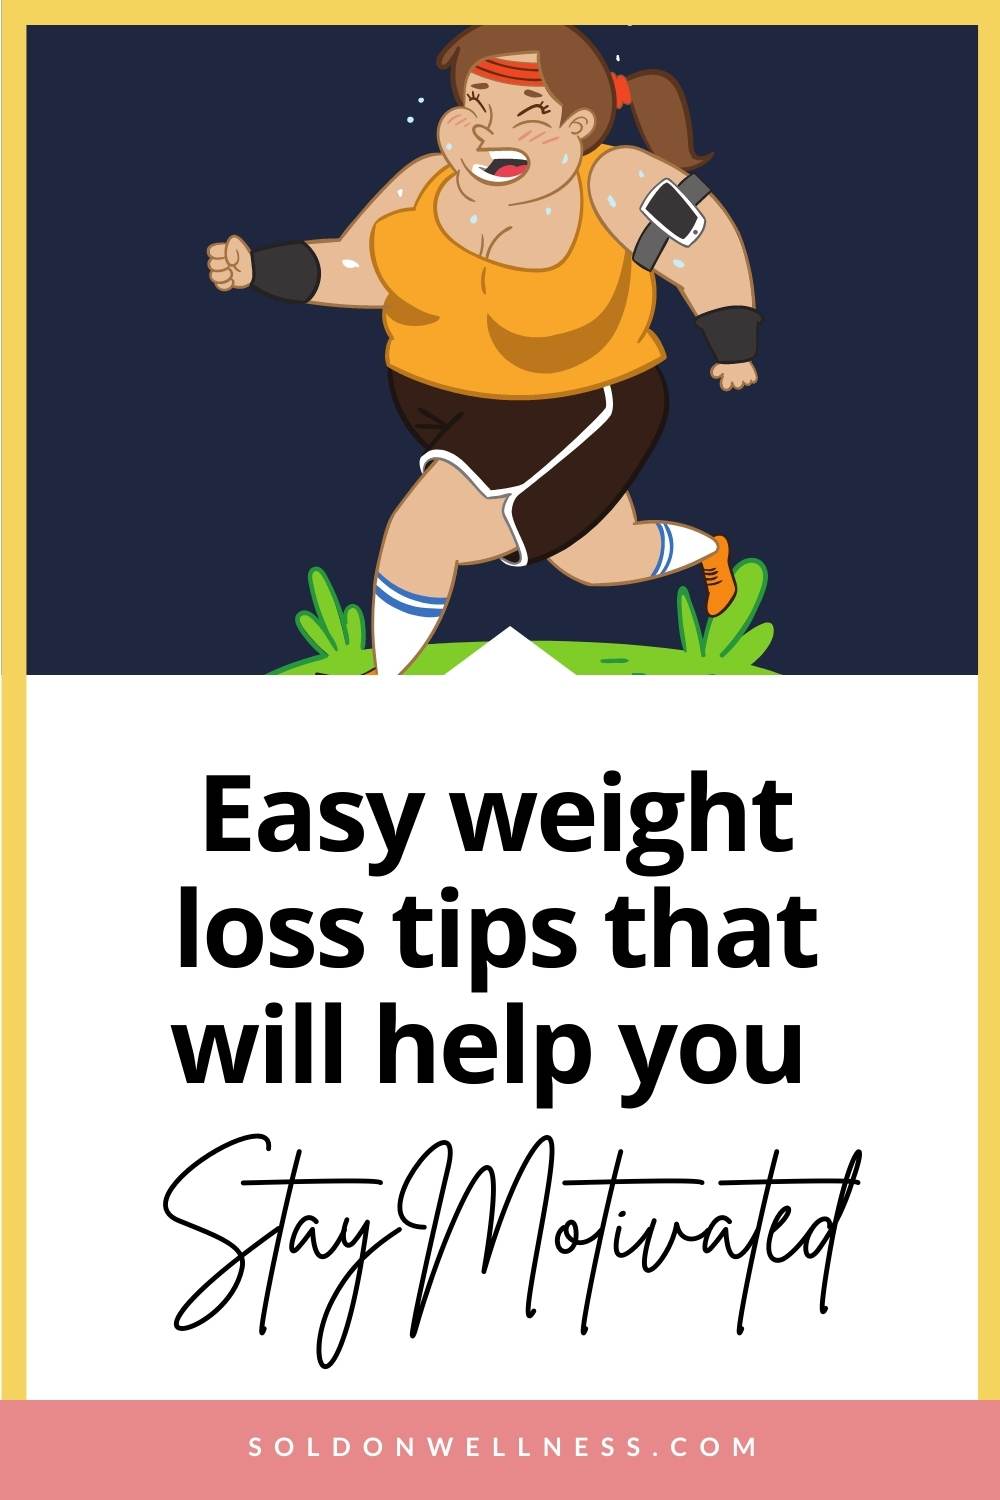 easy weight loss tips